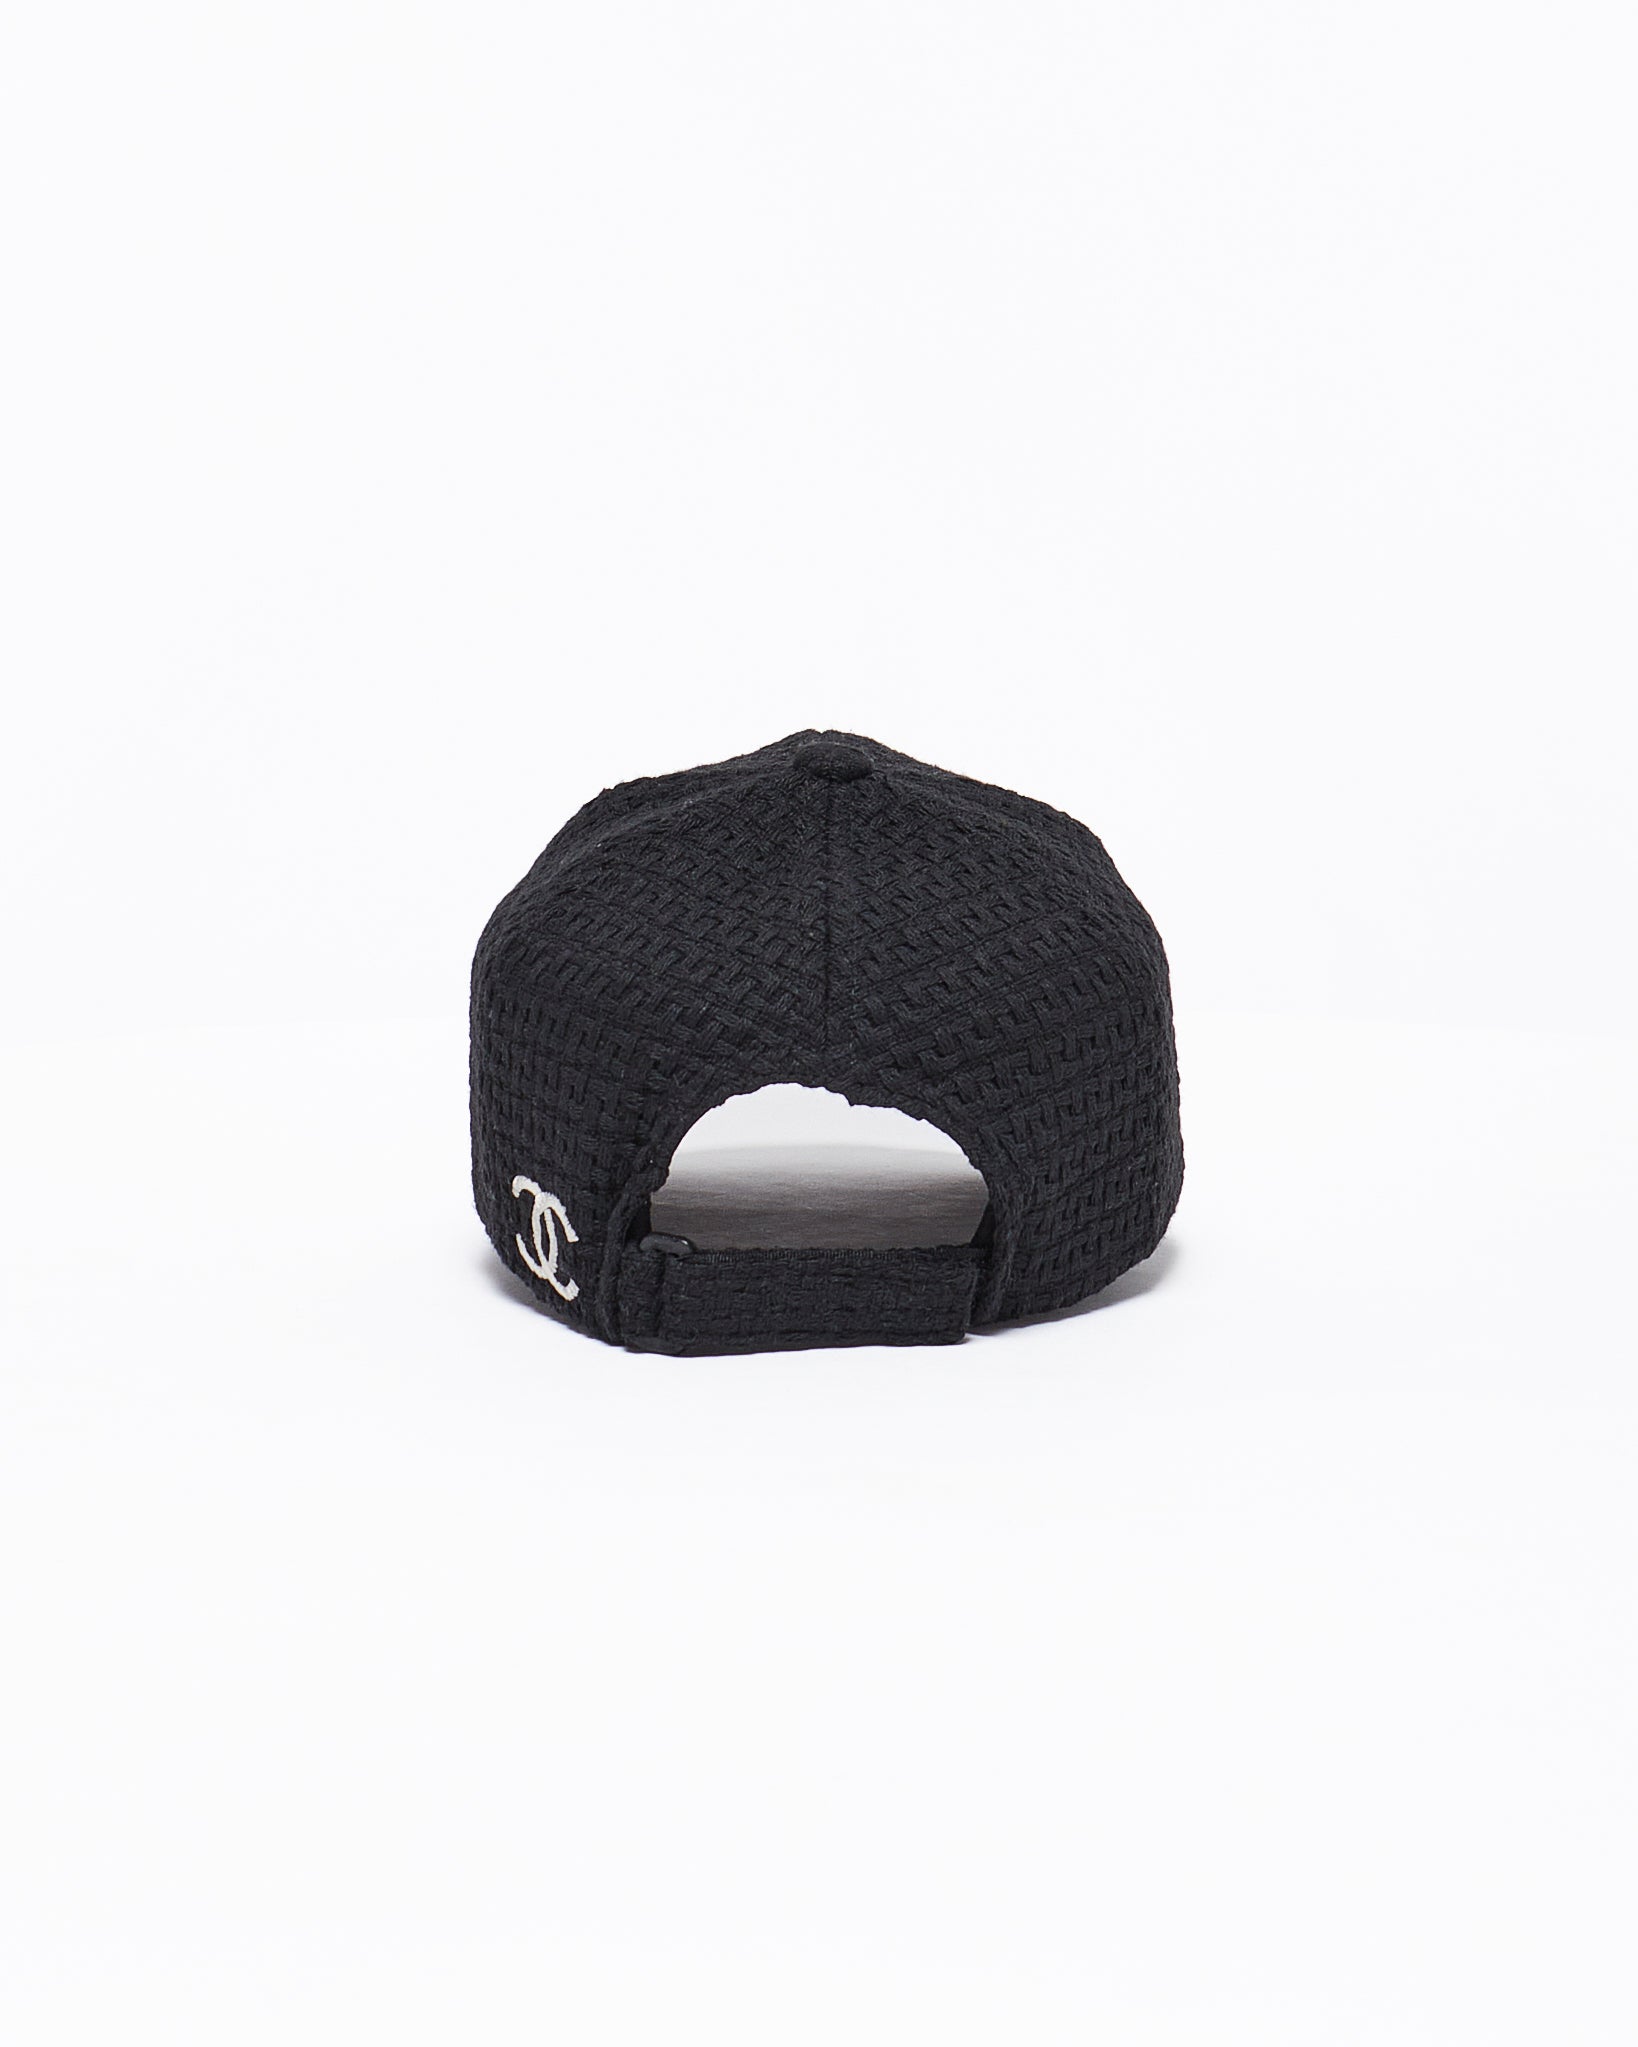 MOI OUTFIT-Logo Embroidered Tweed Cap 12.90